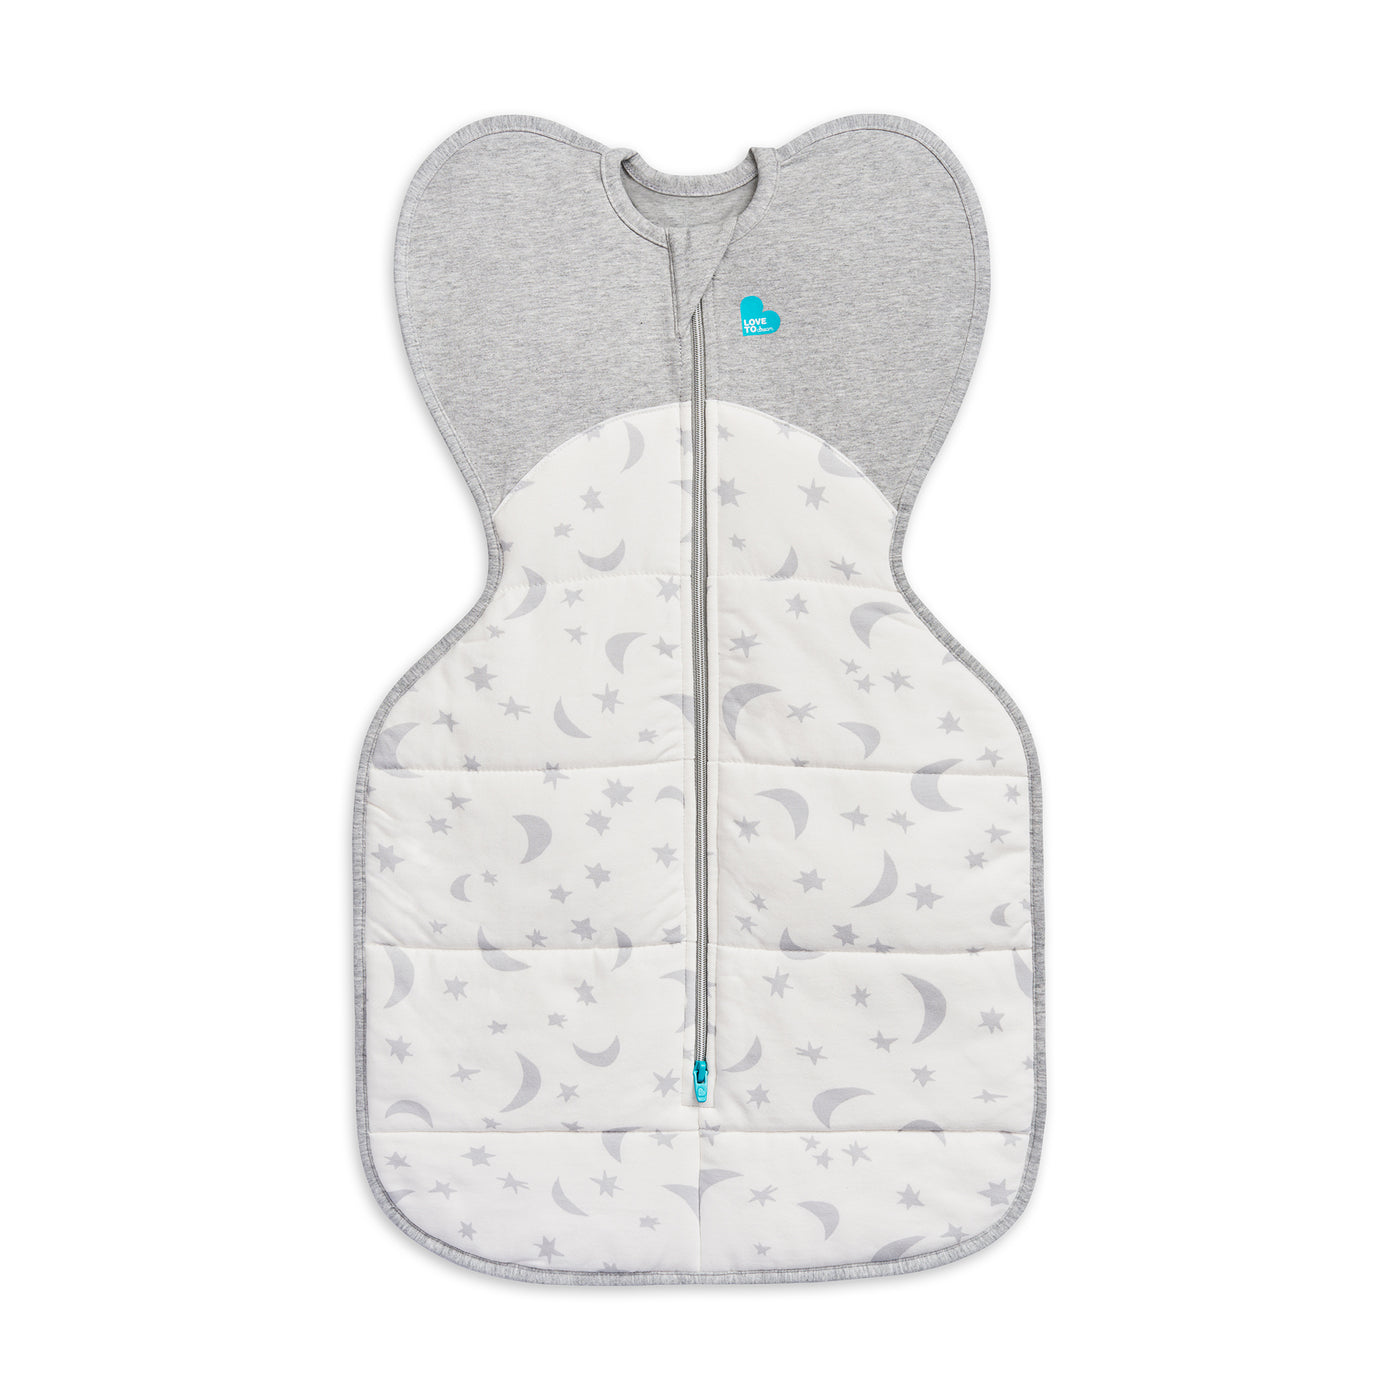 Winter Swaddle Up™ Starter Pack - 2.5 & 3.5 TOG - Love to Dream™ NZ 